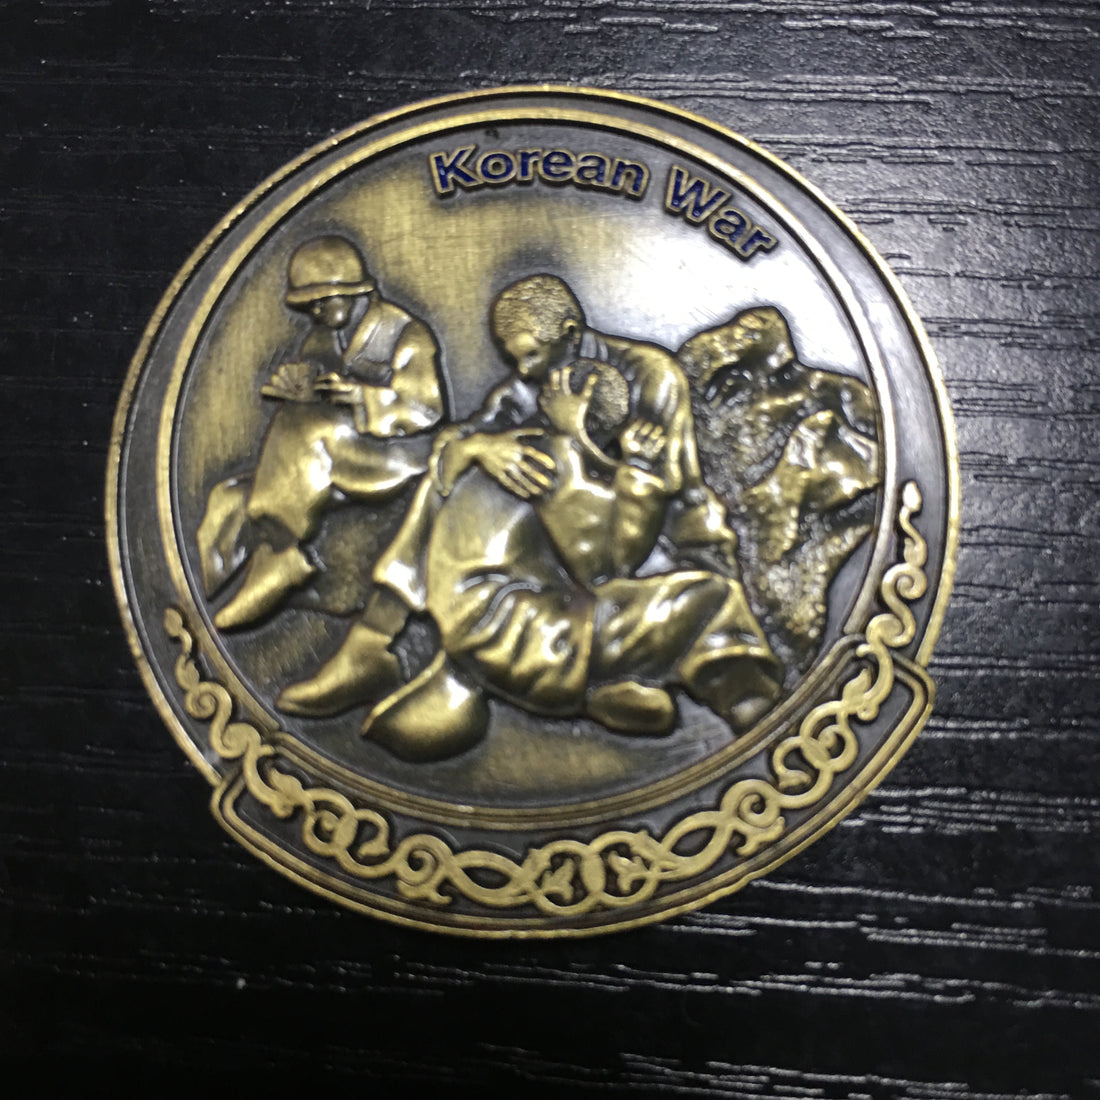 The Forgotten War challenge coin, for North Korea and South Korea, People's Volunteer Army 2